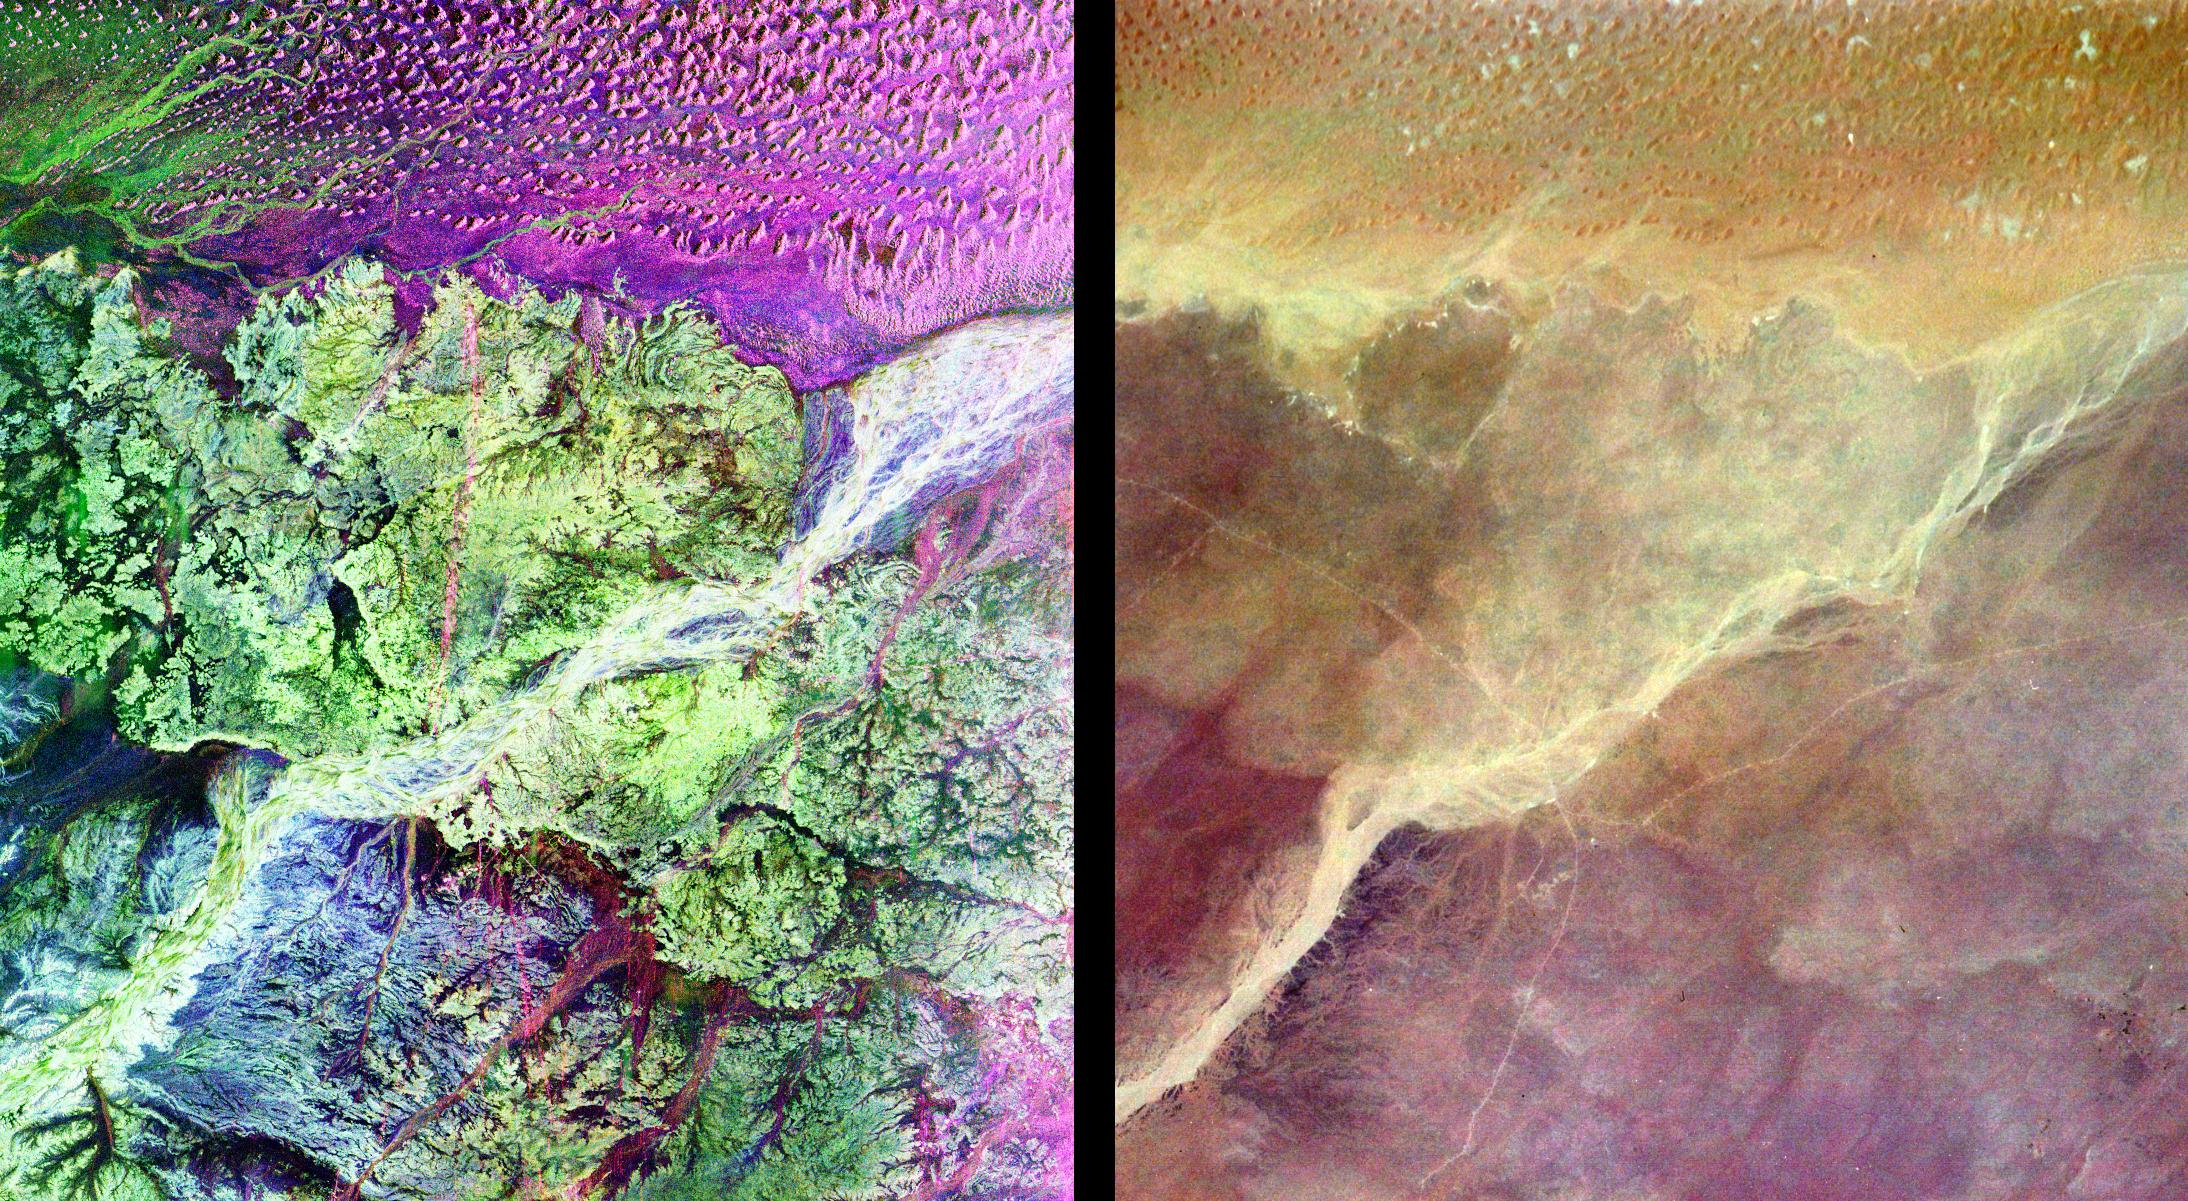 This pair of images from space shows a portion of the southern Empty Quarter of the Arabian Peninsula in the country of Oman. On the left is a radar image of the region around the site of the fabled Lost City of Ubar. On the right is an enhanced optical image taken by astronauts onboard the Space Shuttle. Credit: NASA/JPL.